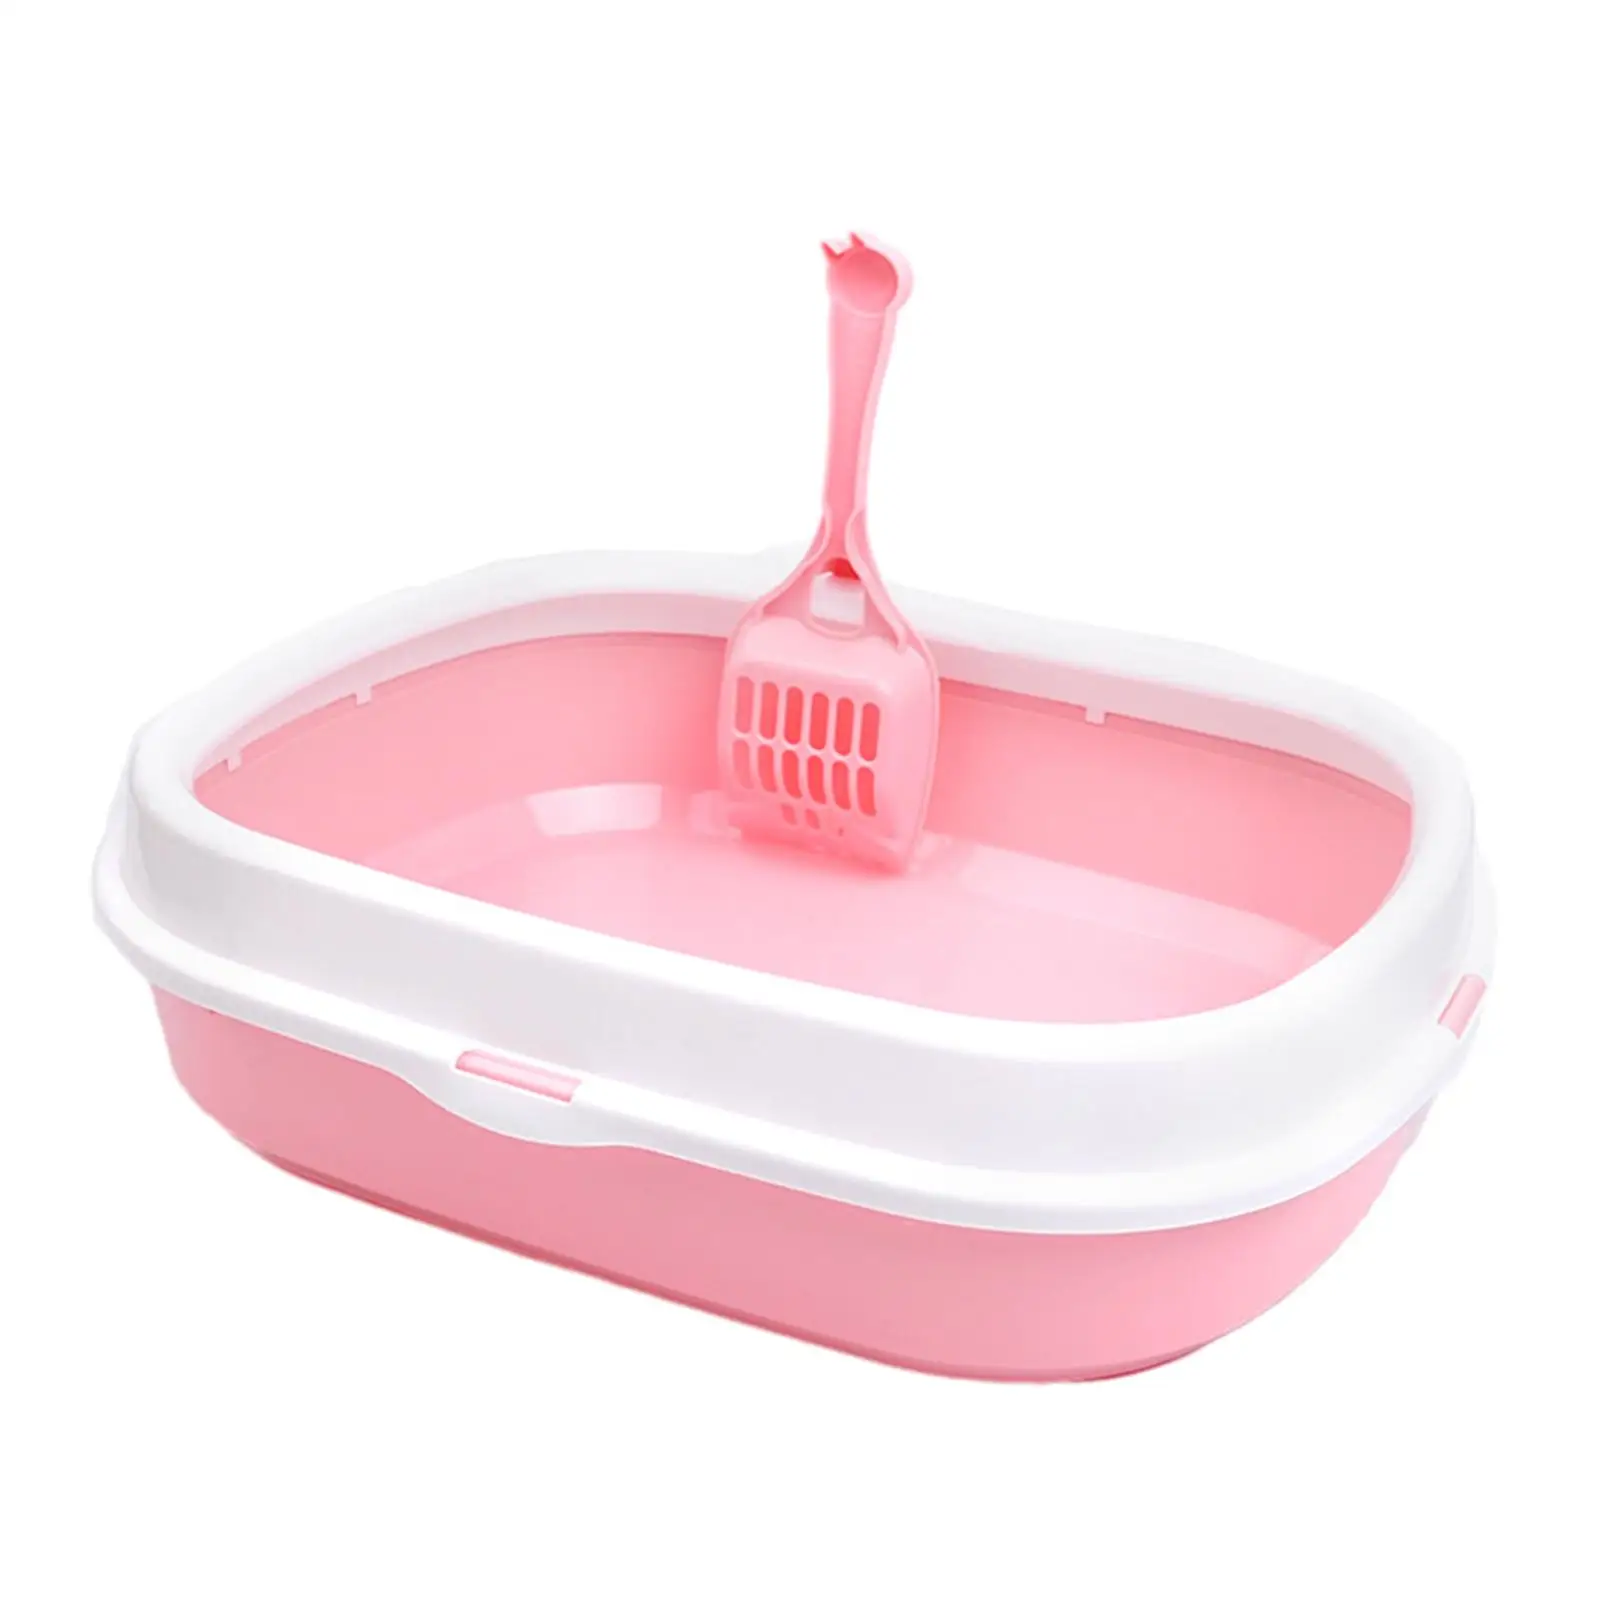 Cat Litter Box, Cat Bedpan Portable with Scoop, High Sides Cat Litter Container,